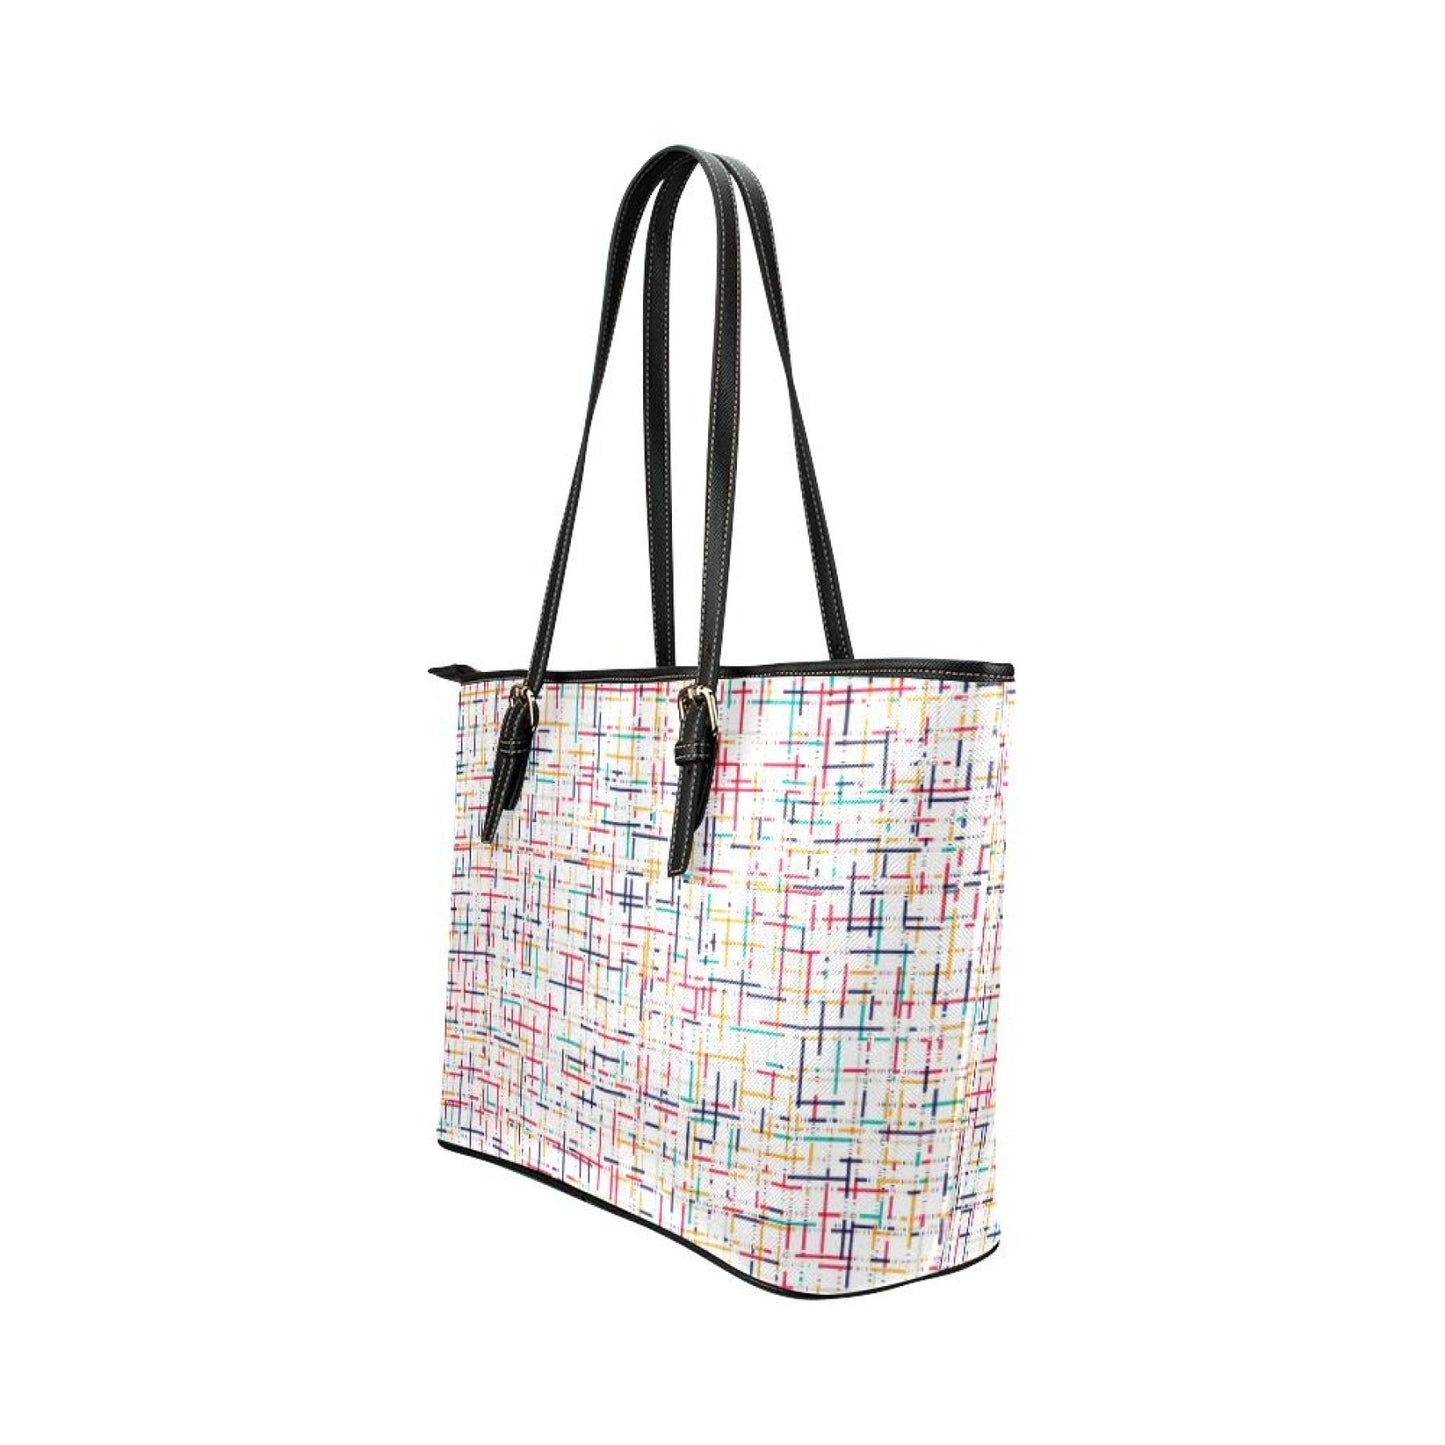 Tote Bags, White Colorful Stripes Style Bag Grey Coco